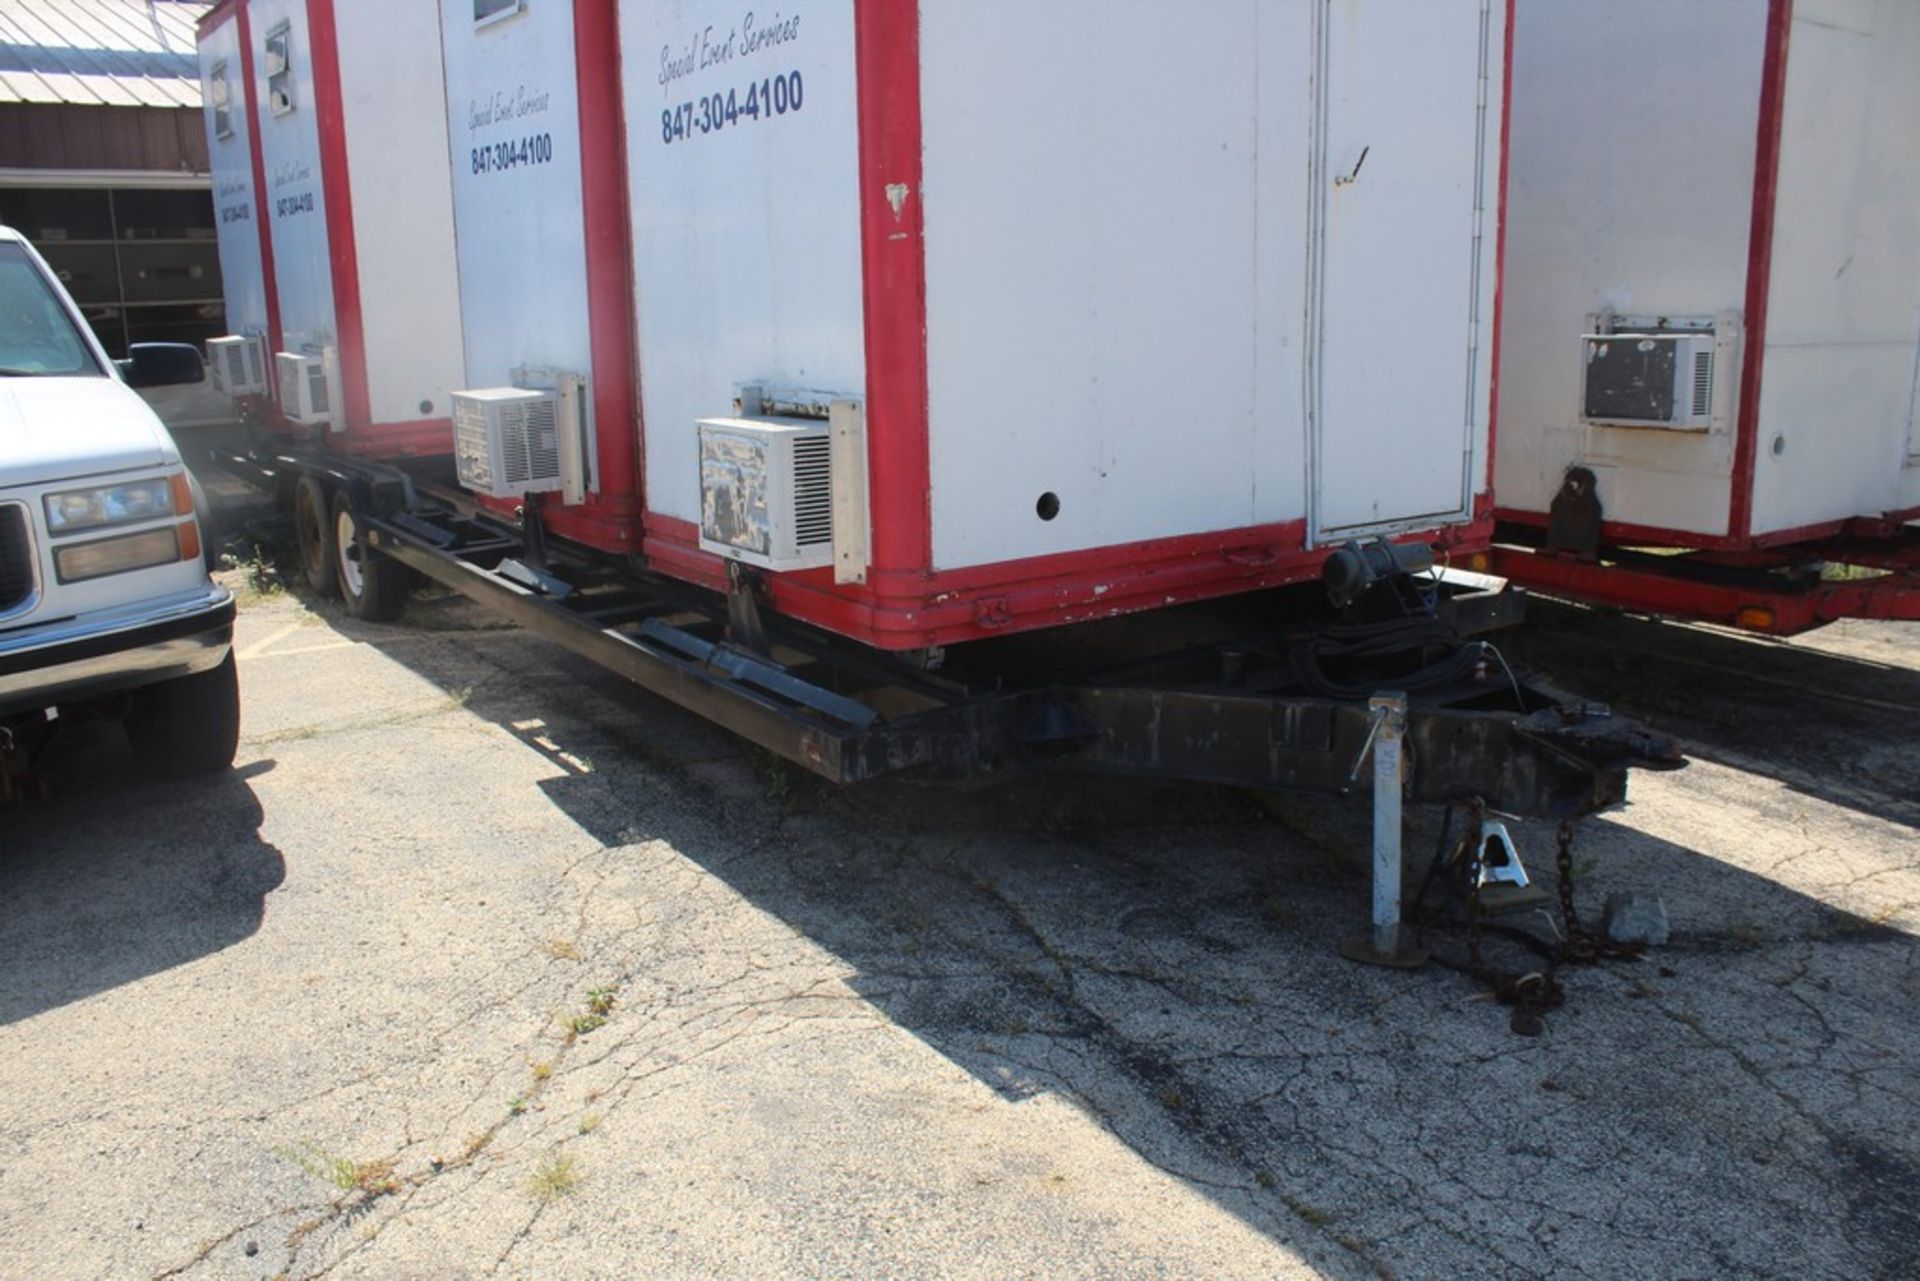 TANDEM AXLE FLATBED TRAILER, 24' WITH (4) TICKET BOOTHS, 7' X 56" X 93" WITH A/C UNITS - Image 2 of 8